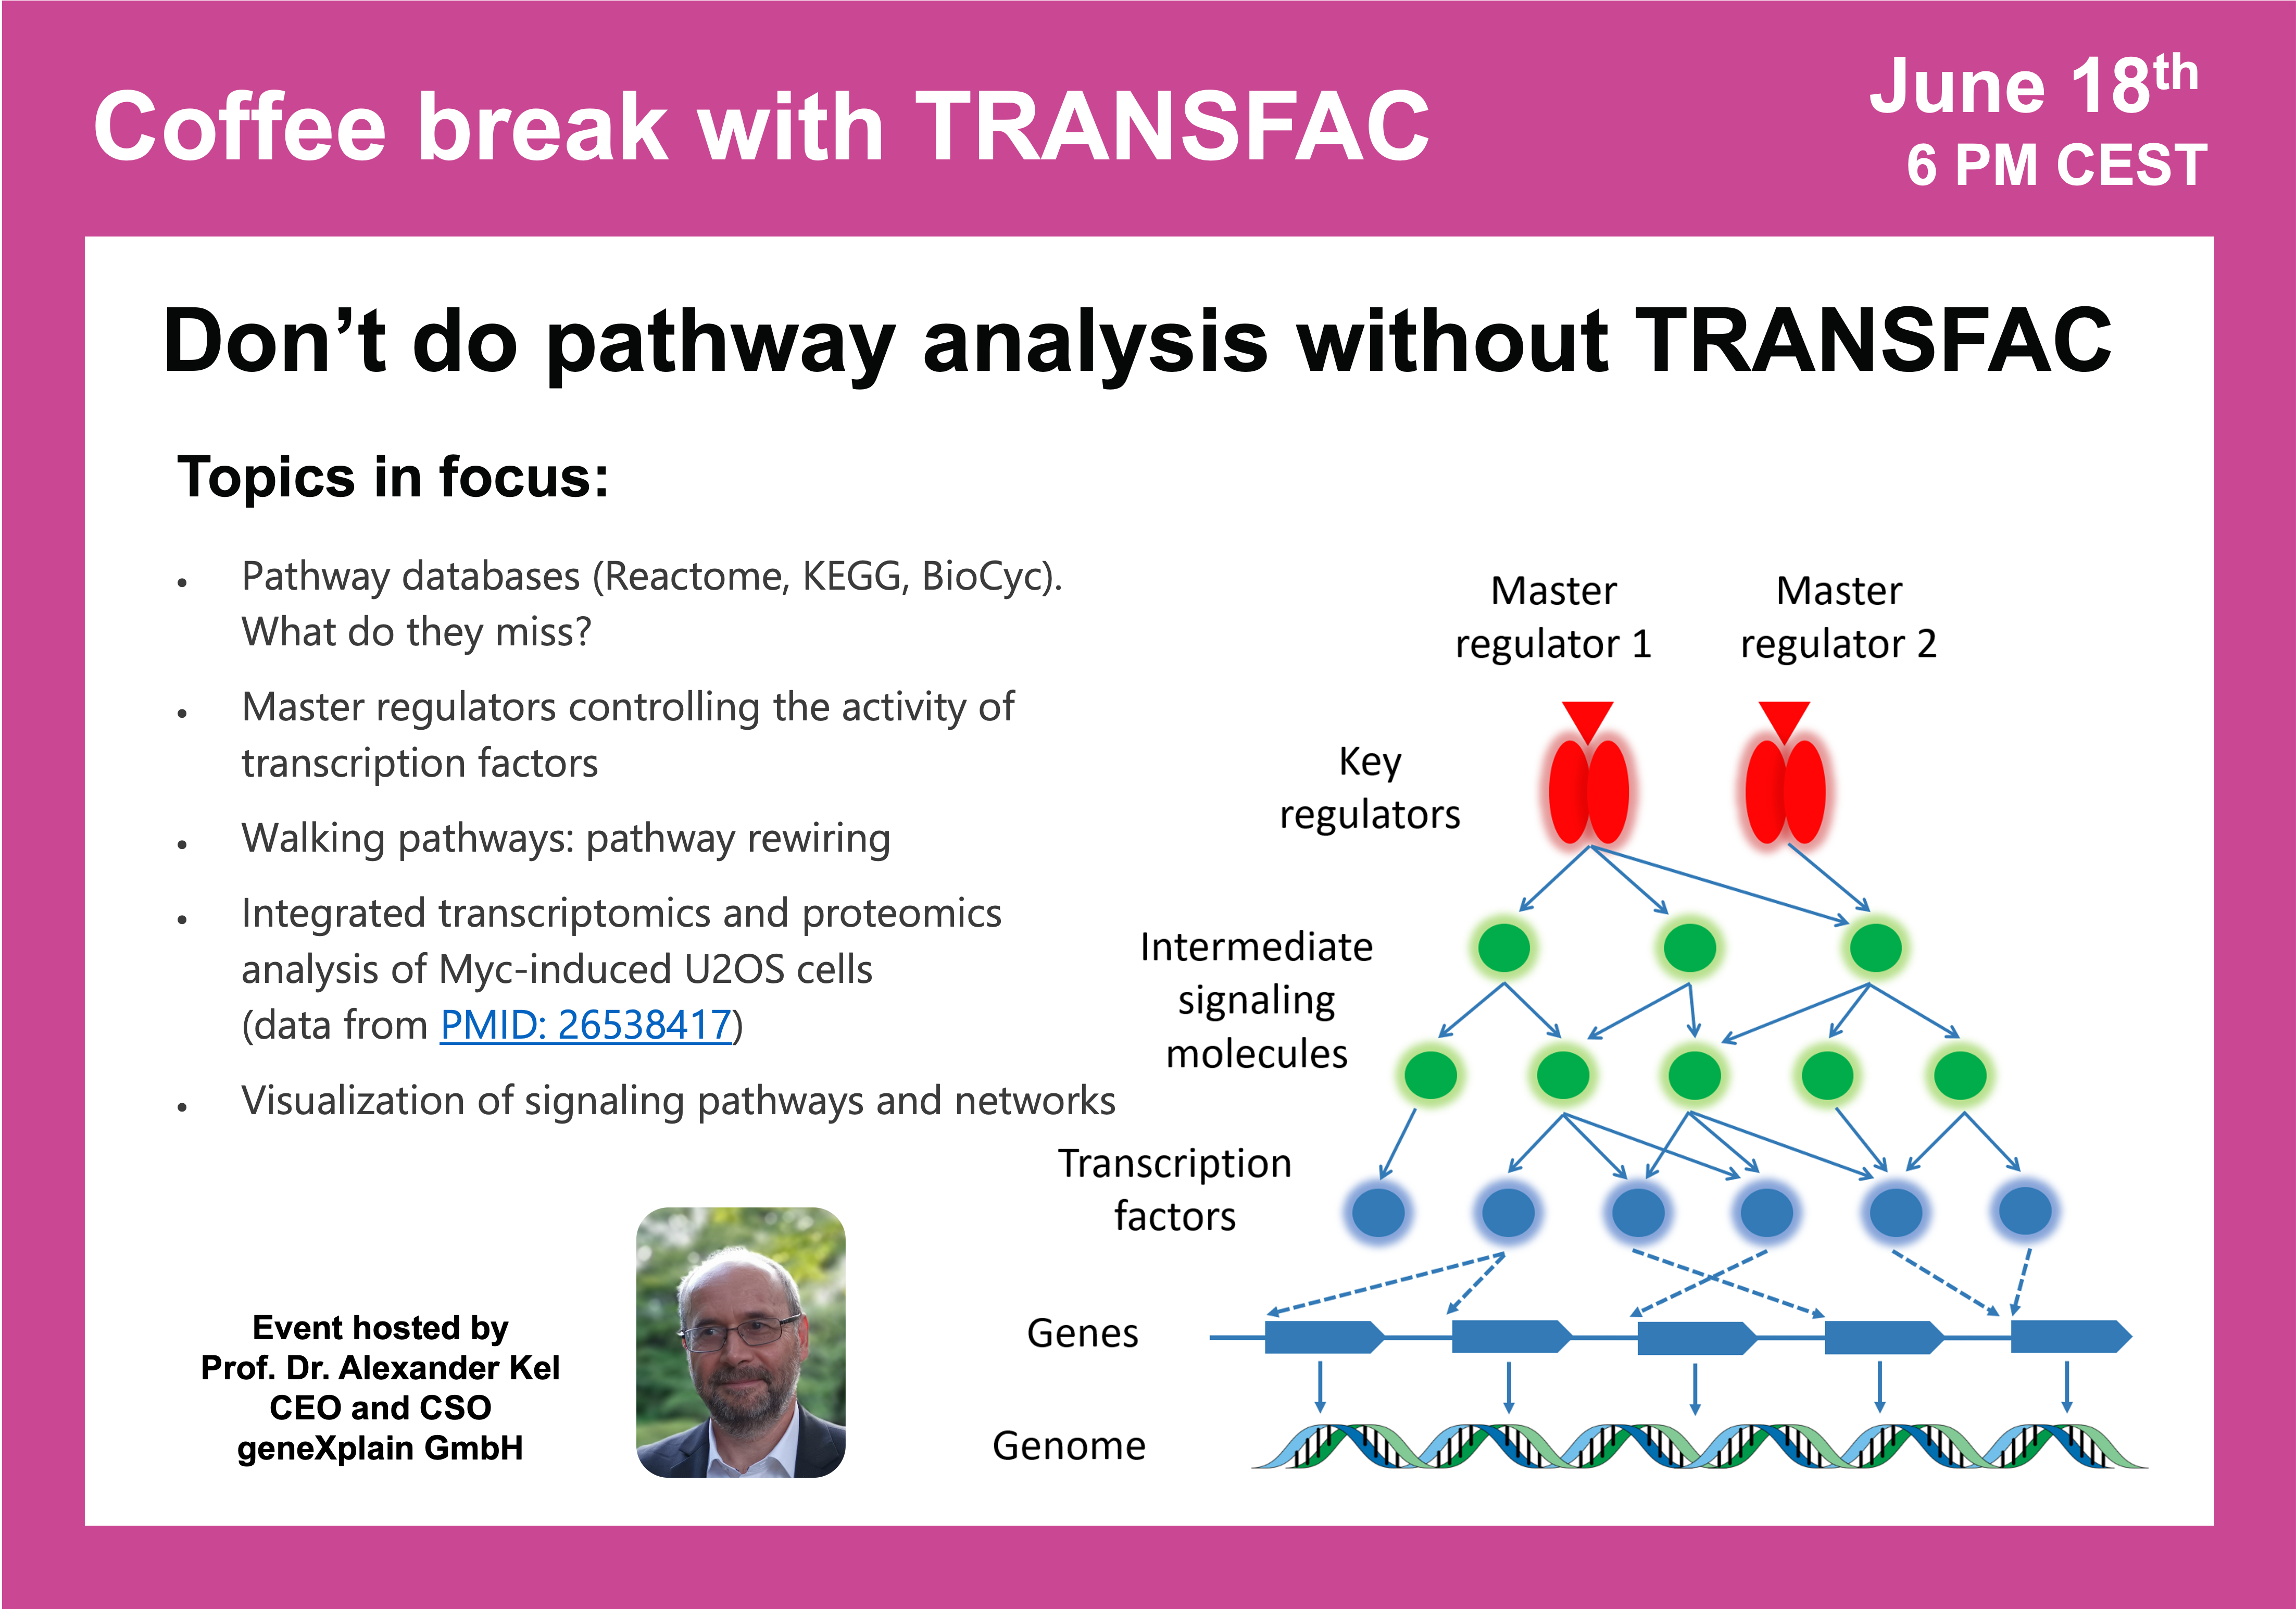 Don't do pathway analysis without TRANSFAC